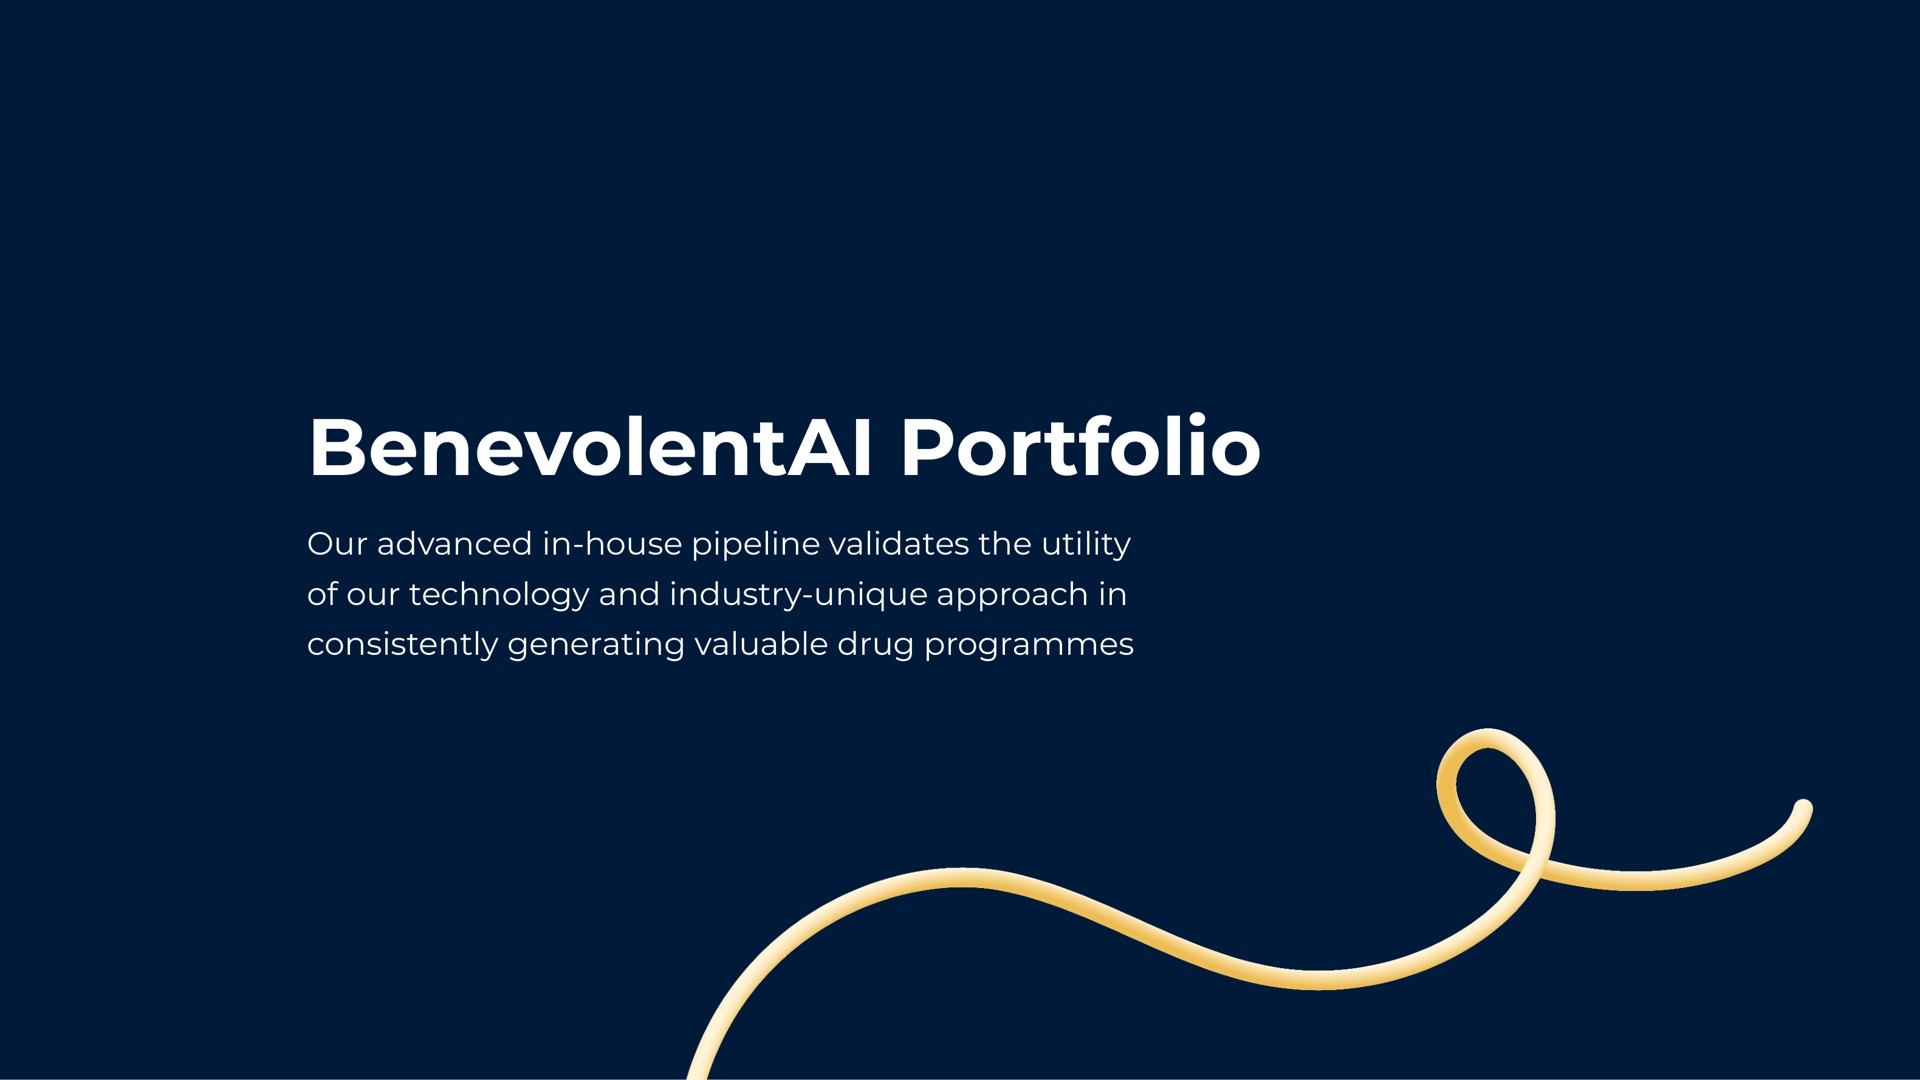 portfolio our advanced in house pipeline validates the utility of our technology and industry unique approach in consistently generating valuable drug programmes | BenevolentAI